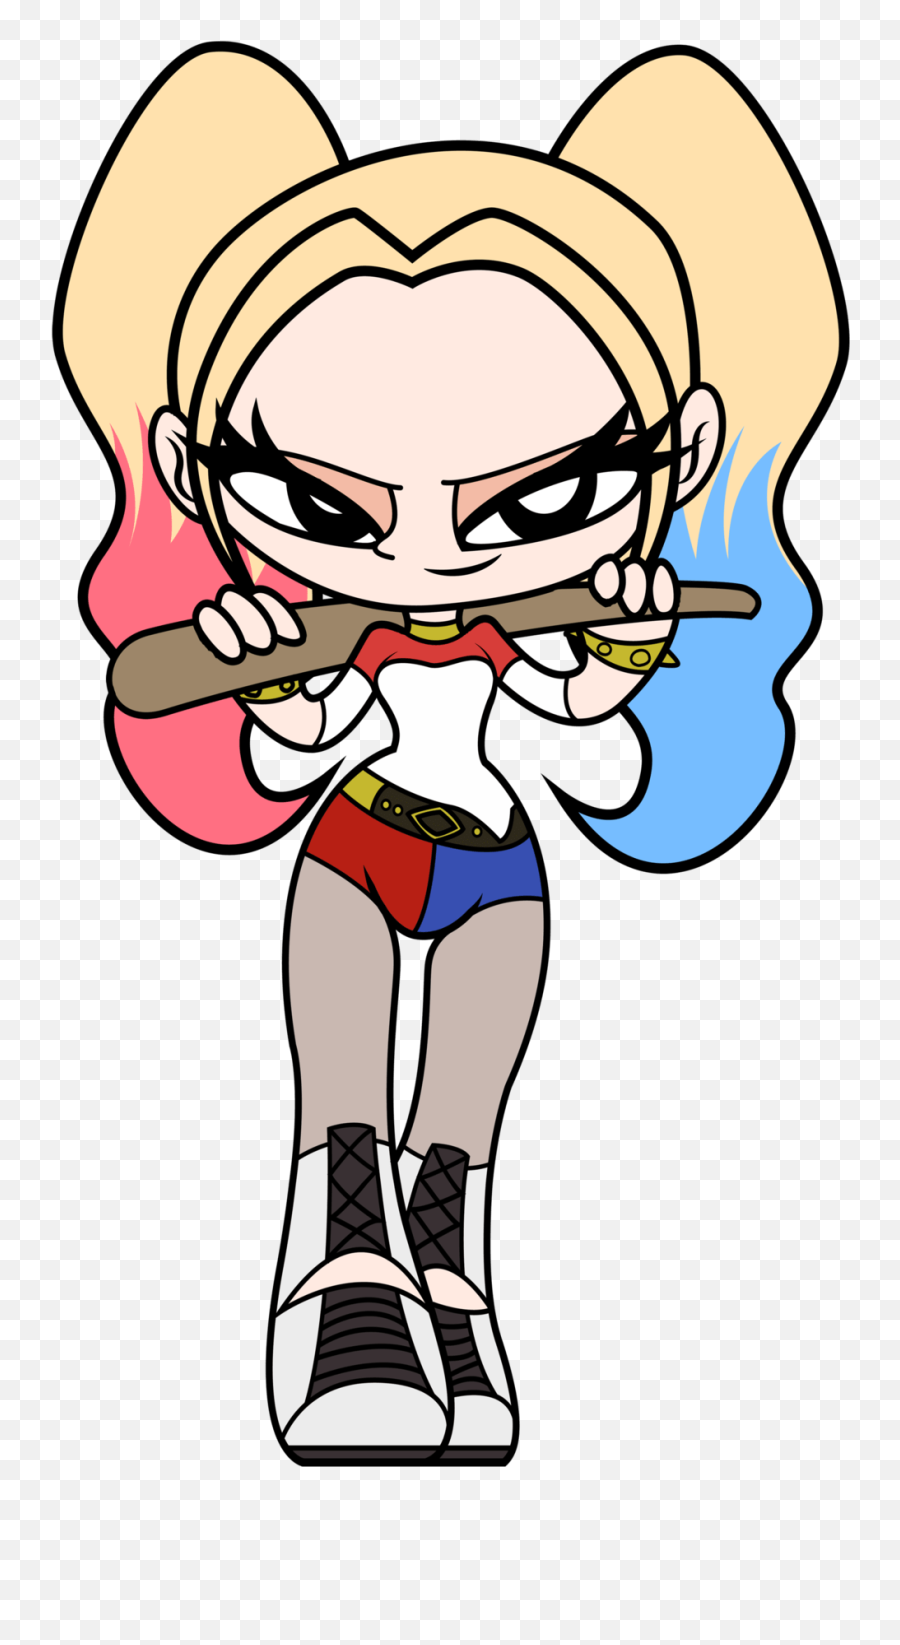 Harley Quinn Suicide Squad Clipart - Suicide Squad Harley Cute Harley Quin Cartoon Emoji,Harley Quinn Png